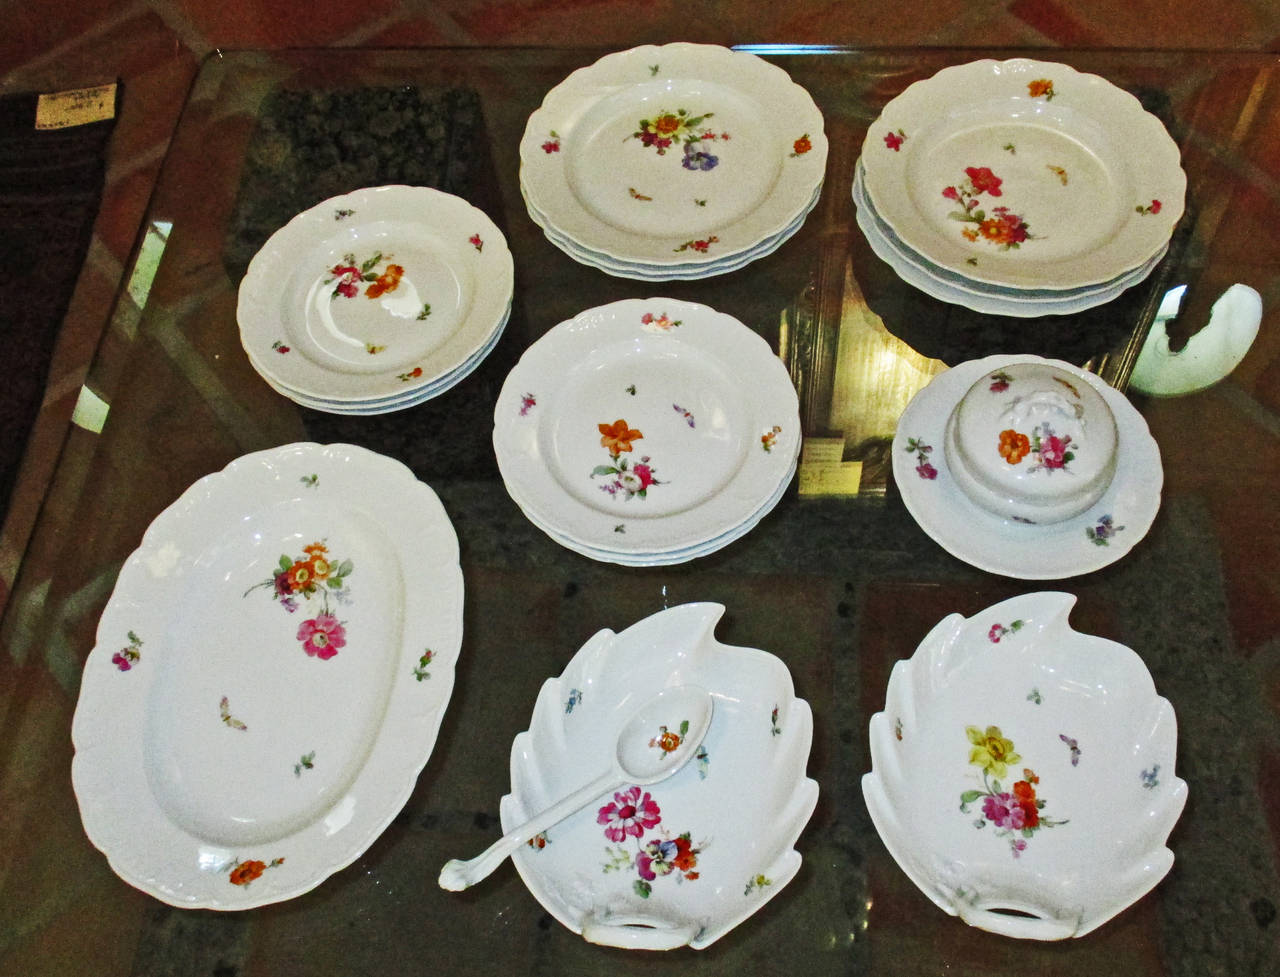 These fine dishes are hand decorated with flowers and insects. Their Iron Cross mark indicates they were made after 1914.  The dimensions are as follows:  9.5